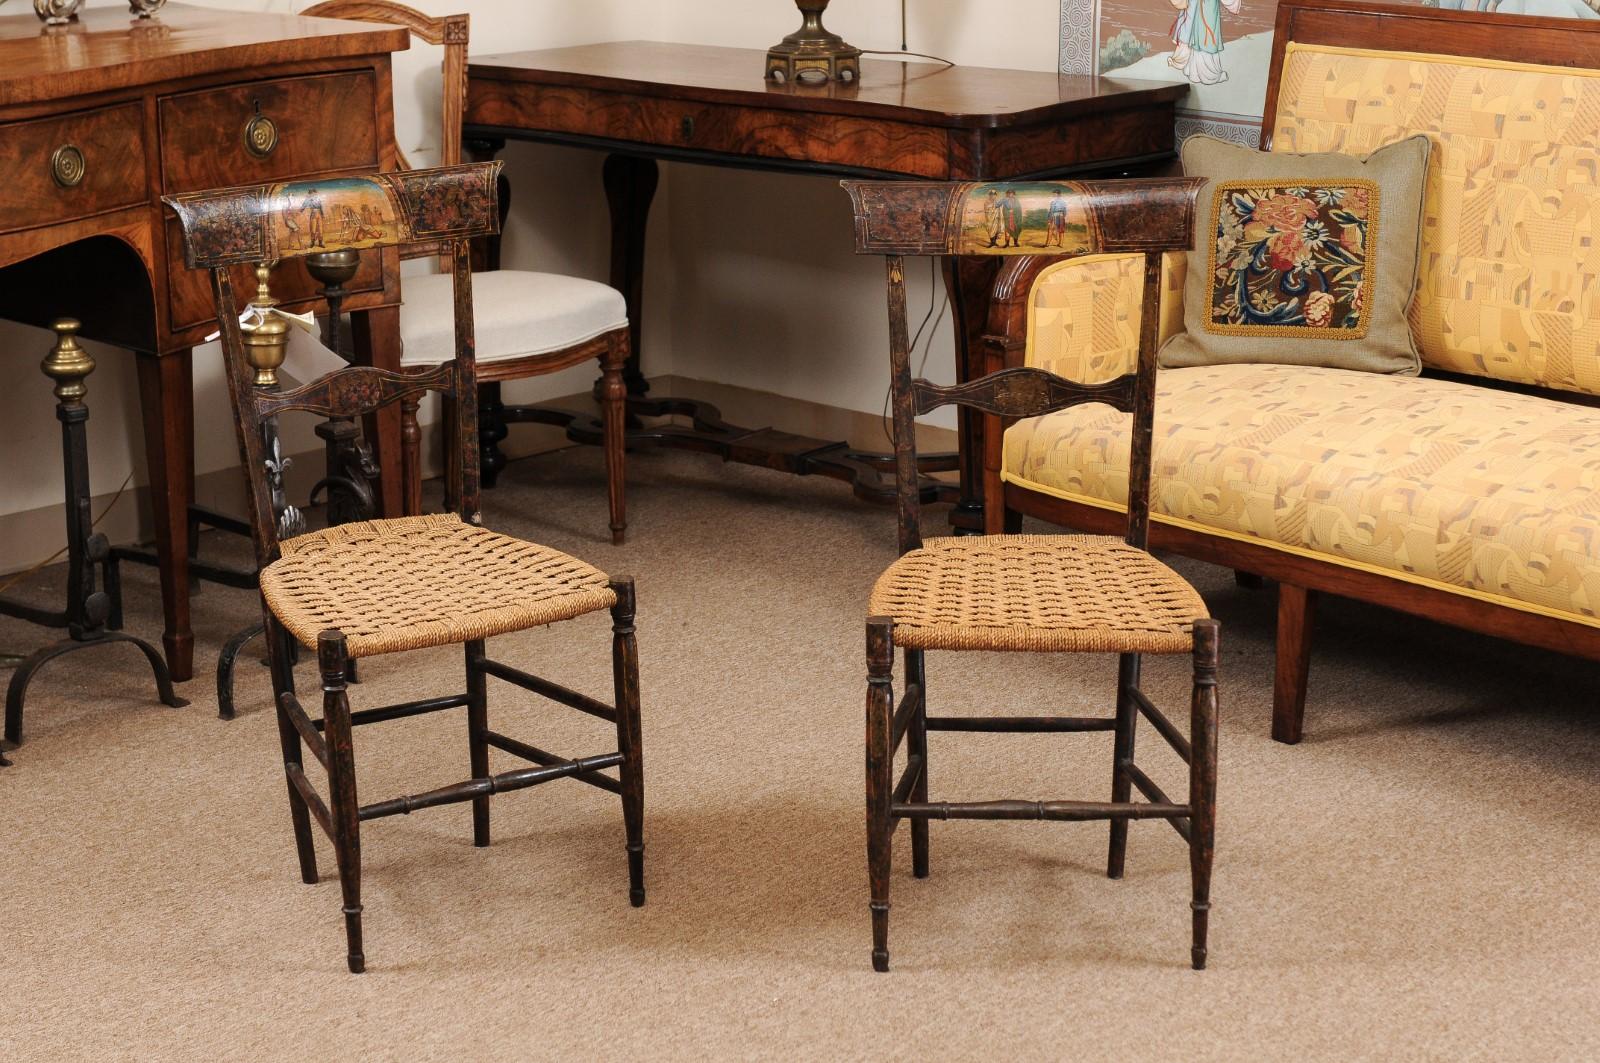 A pair of Neoclassical Black Painted Side Chairs with Woven Seats, Italy circa 1790. These period chairs feature rounded tapered legs and a unique individual figural painted scene at the top of each seat back.